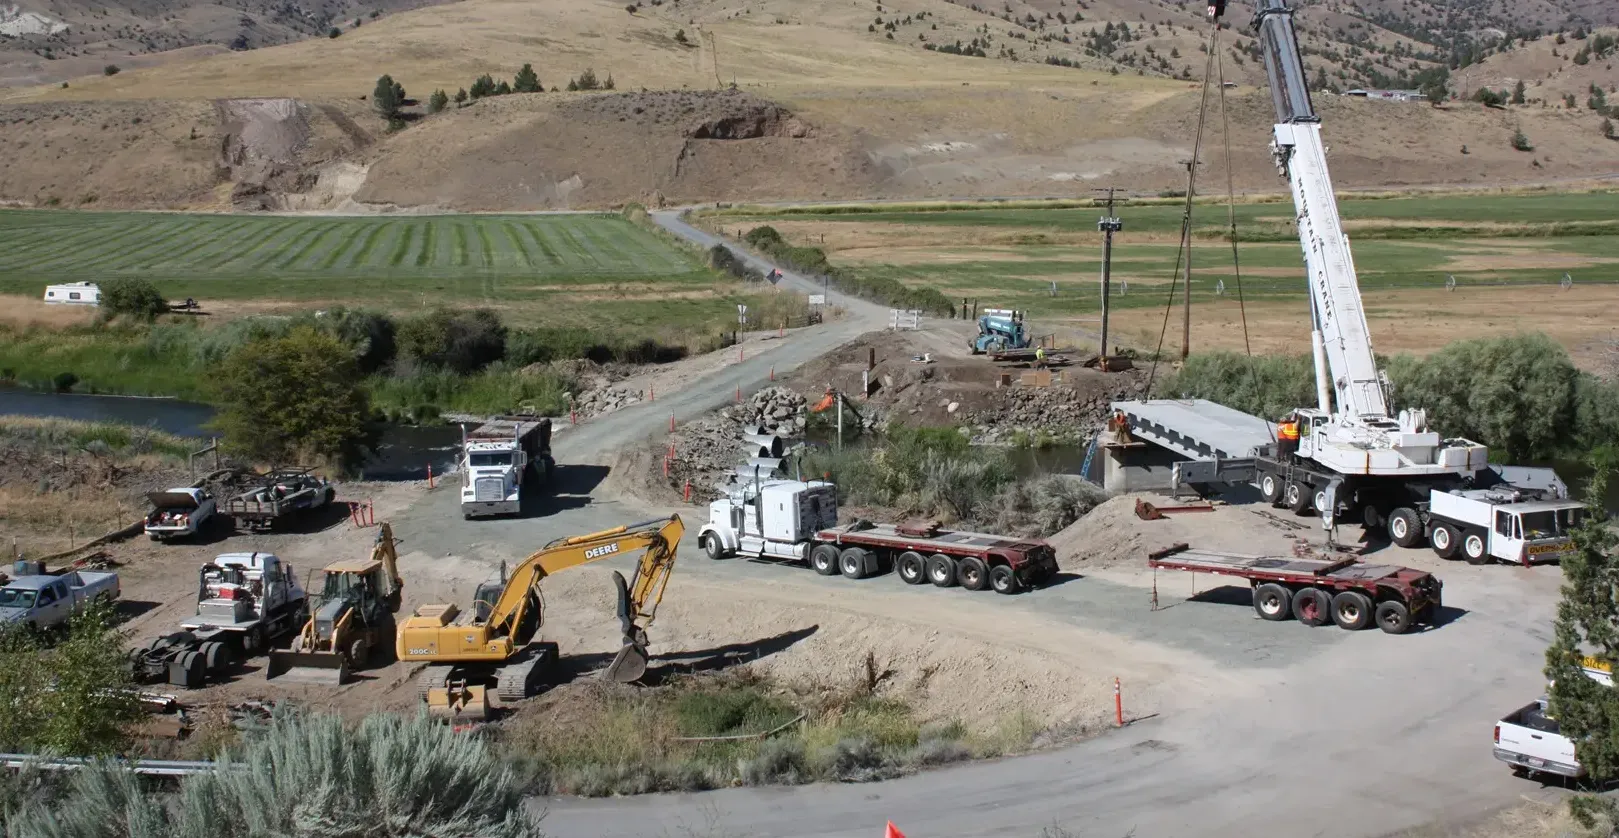 Deschutes Concrete Construction was hired as the general contractor by the BLM to replace this bridge’s superstructure. The bridge crosses the John Day River near Dayville, Oregon. In order to allow traffic to still cross the river, Deschutes installed seven 60